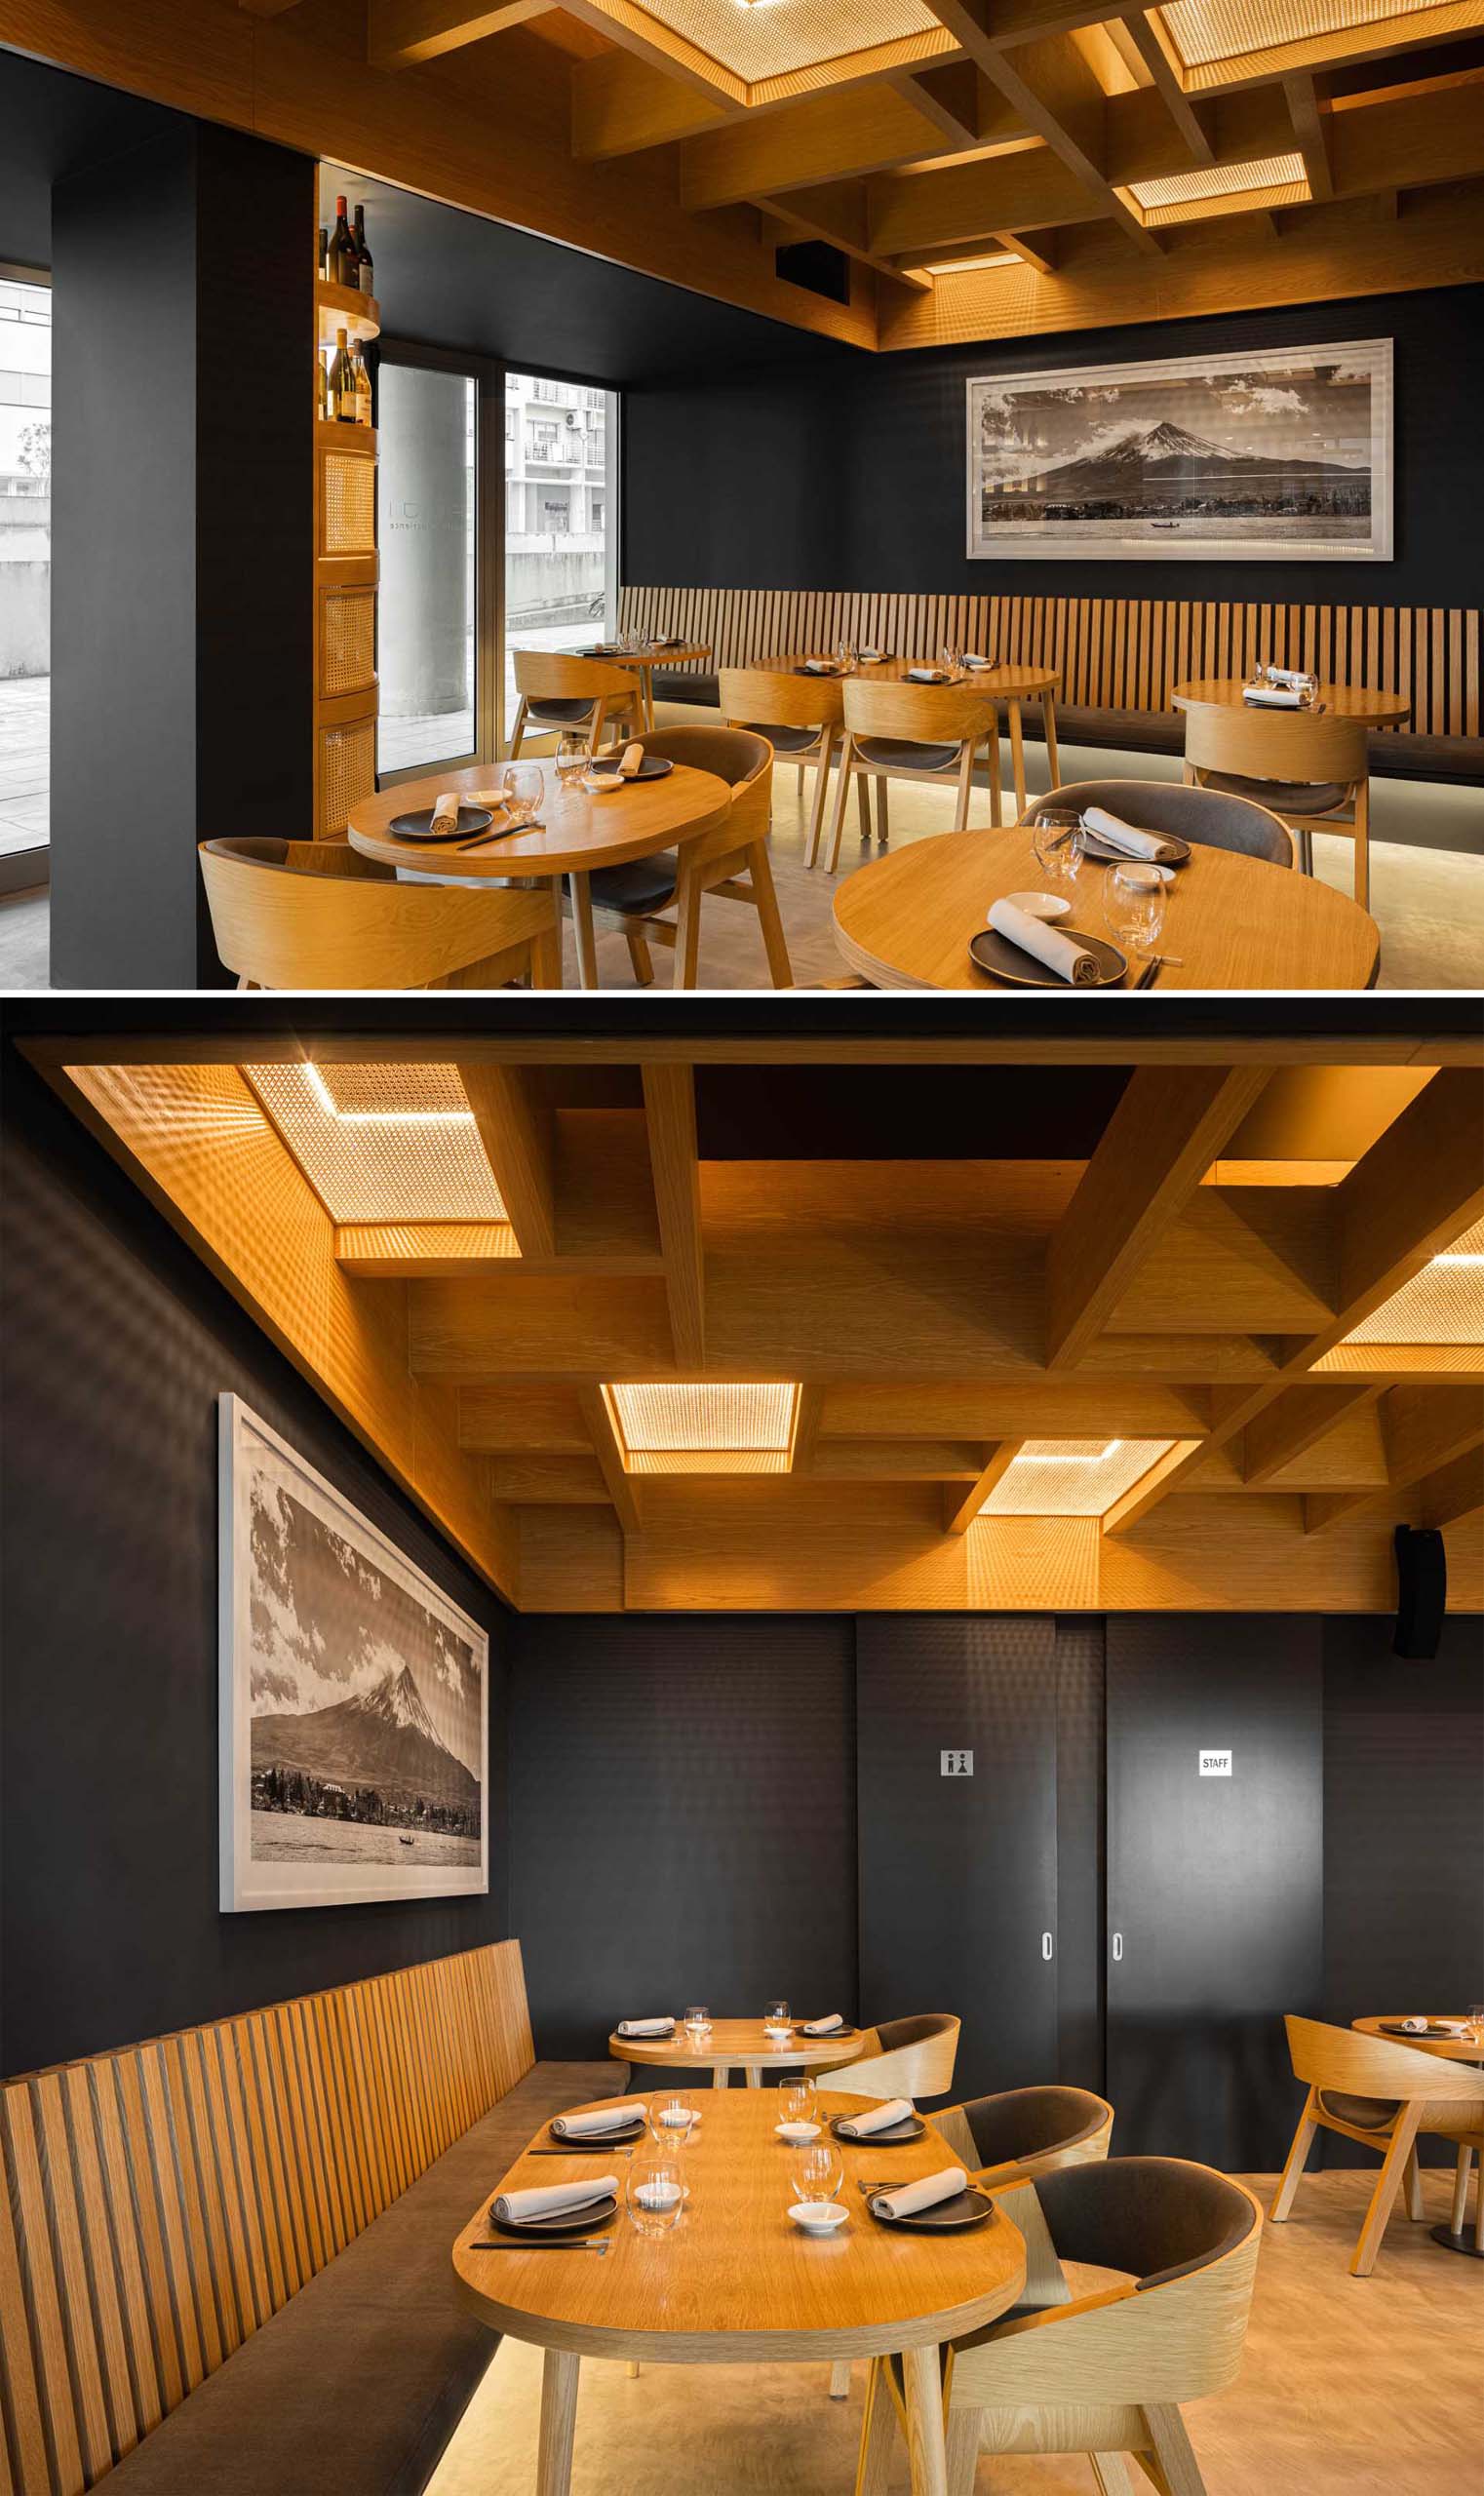 A modern restaurant interior with dark gray walls, wood accents, and hidden LED lighting.